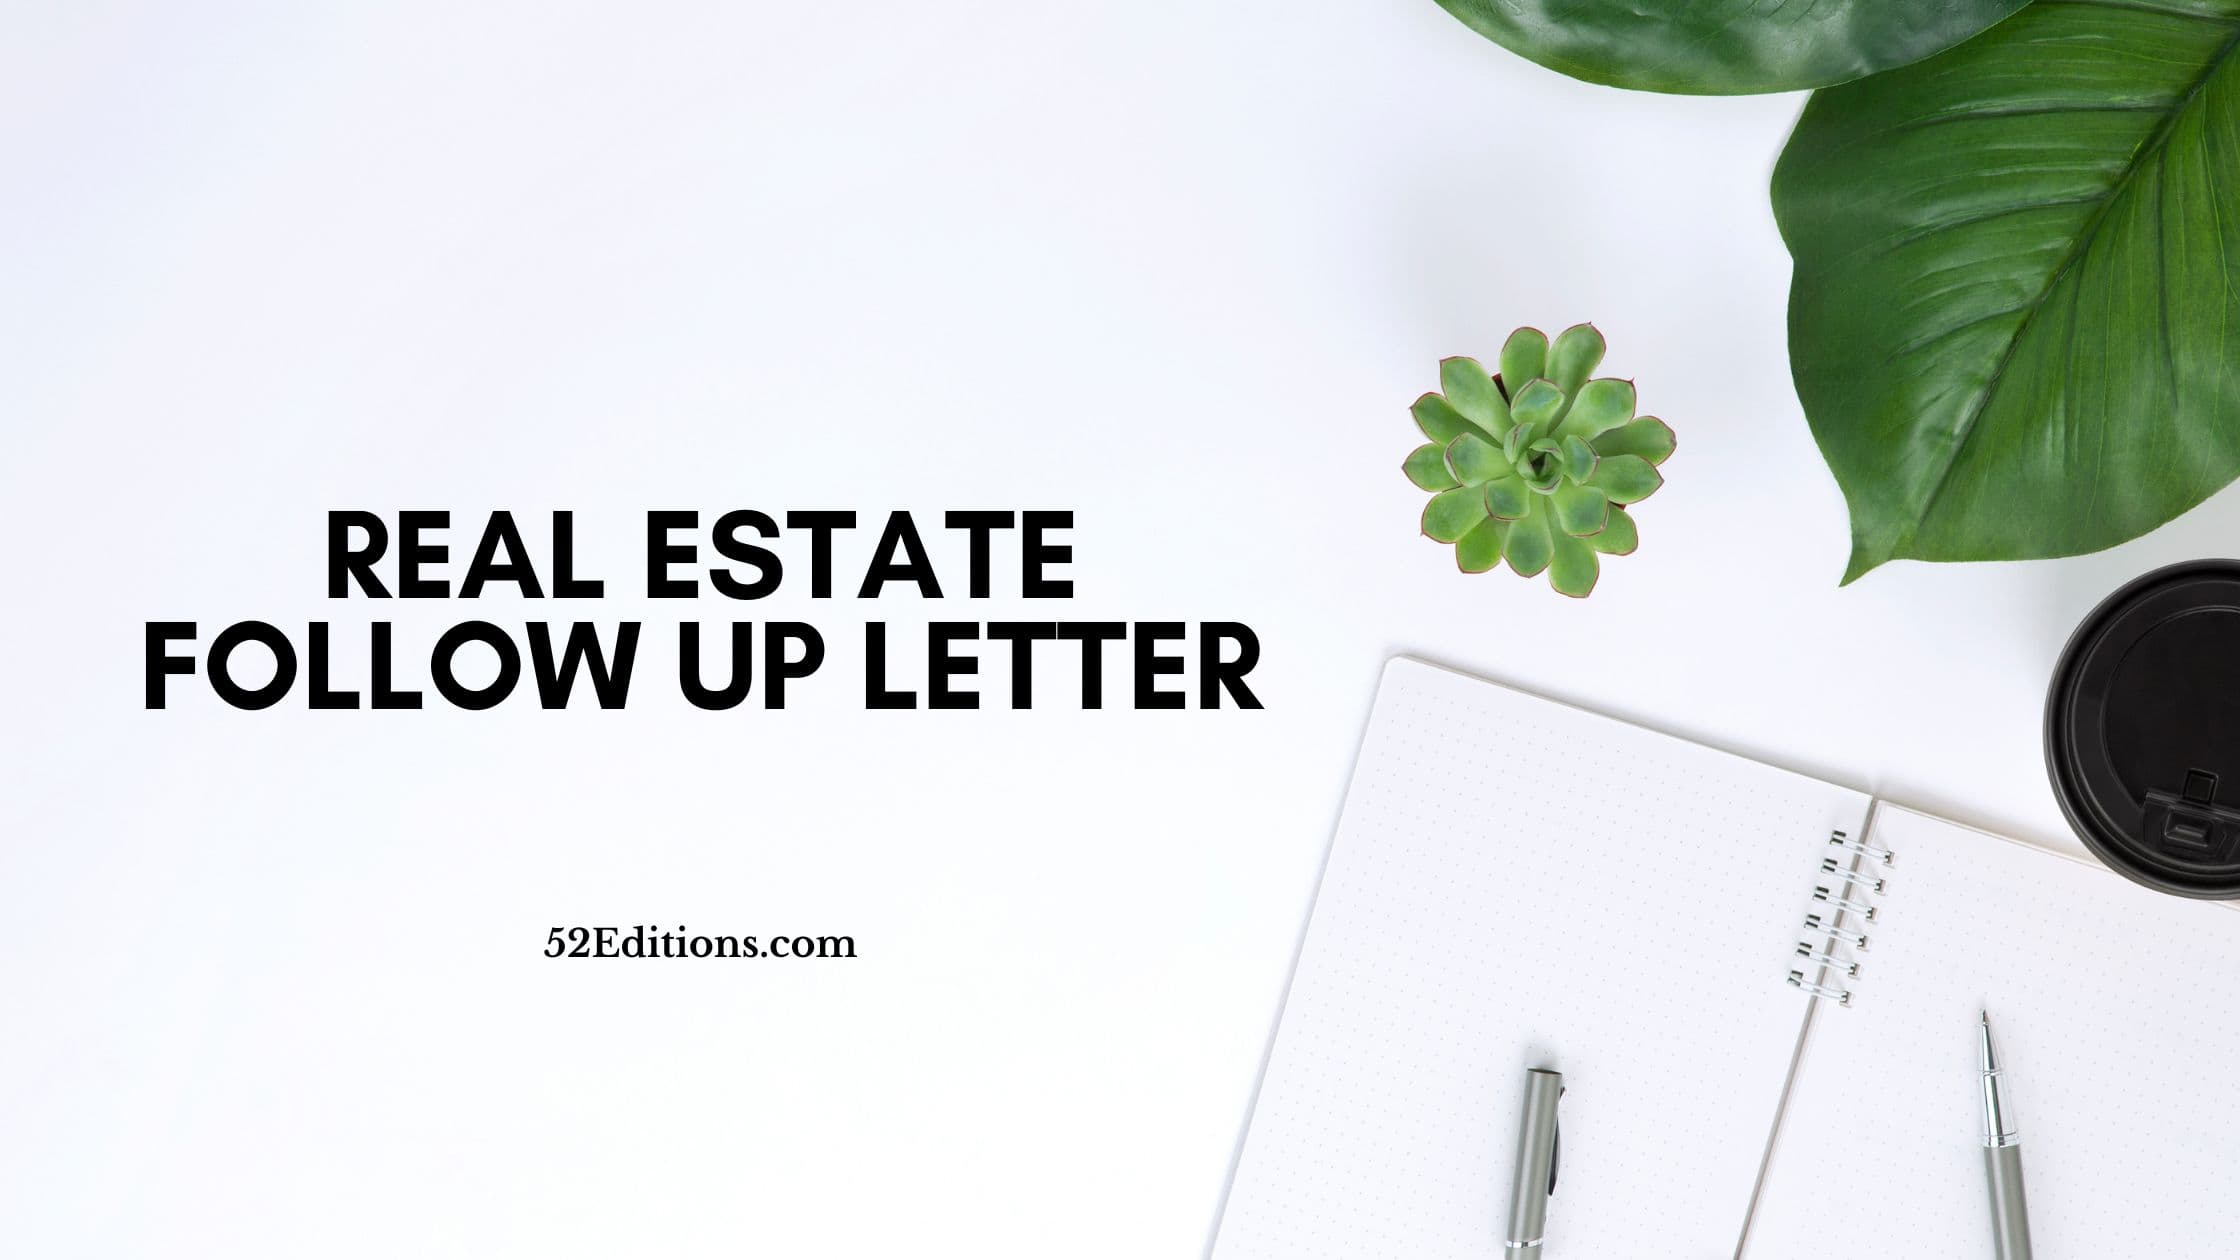 Real Estate Follow Up Letter // Get FREE Letter Templates (Print or